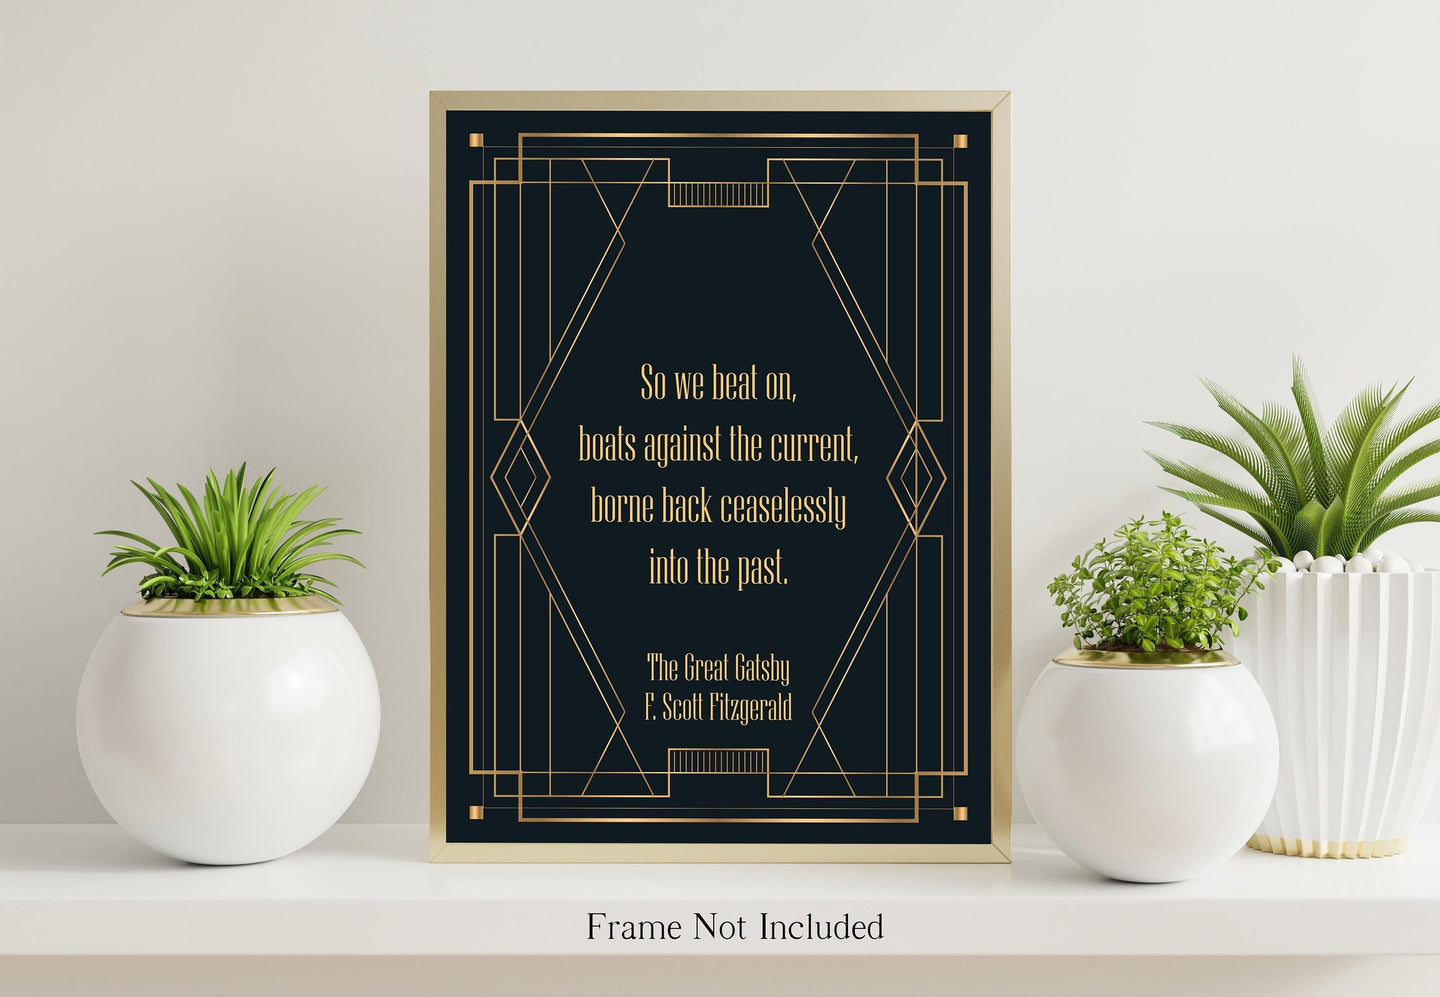 Great Gatsby Print F Scott Fitzgerald Quote - So we beat on, boats against the current - Book Quote Wall Art Physical Print Without Frame